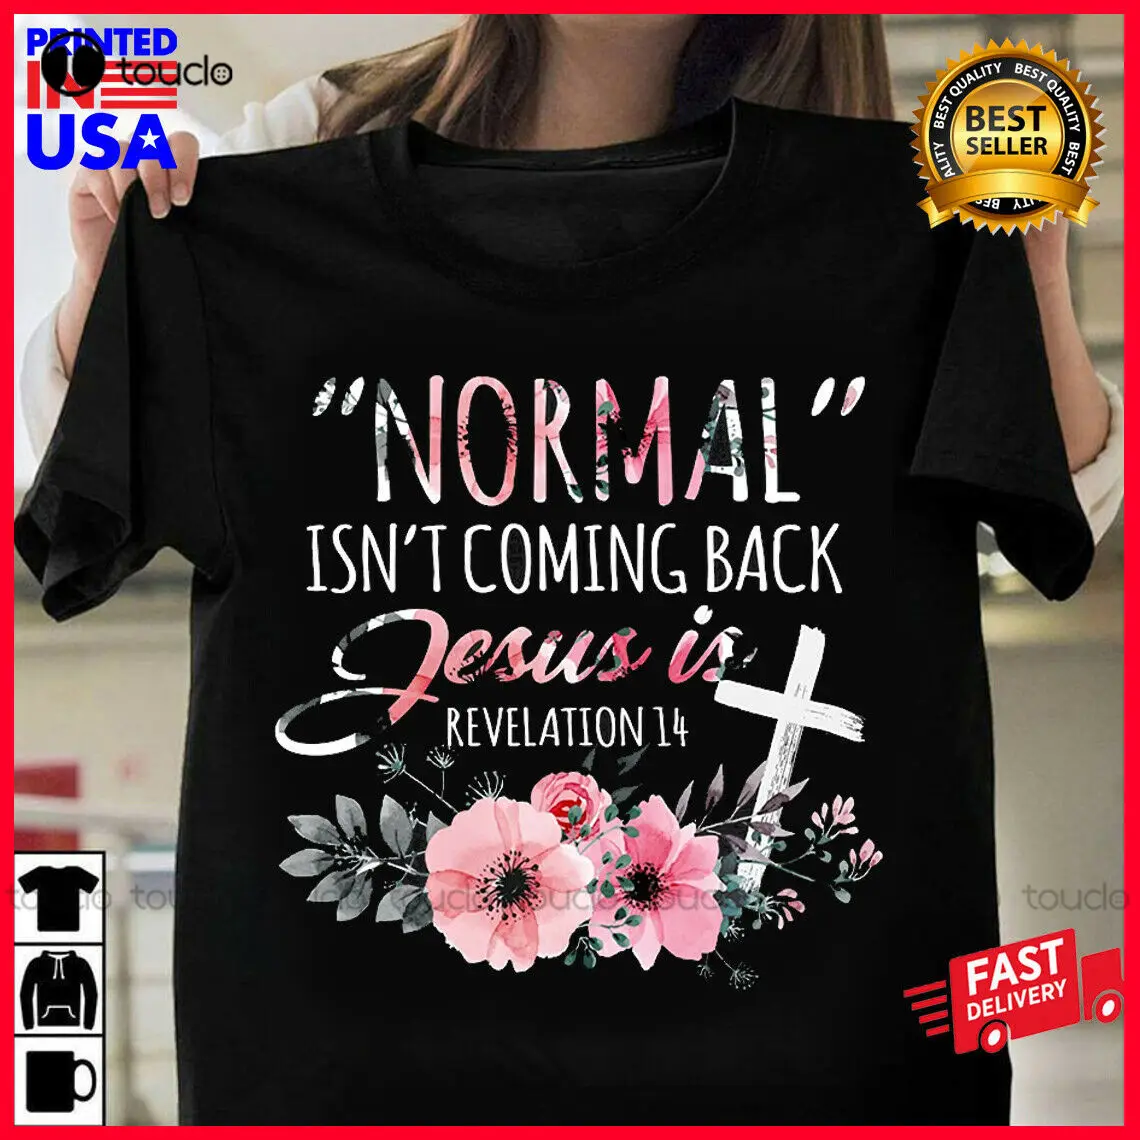 

Normal Isn'T Coming Back But Jesus Is Revelation 14 Flower T shirt Short Sleeves Shirts For Women Christmas Gift Xs-5Xl